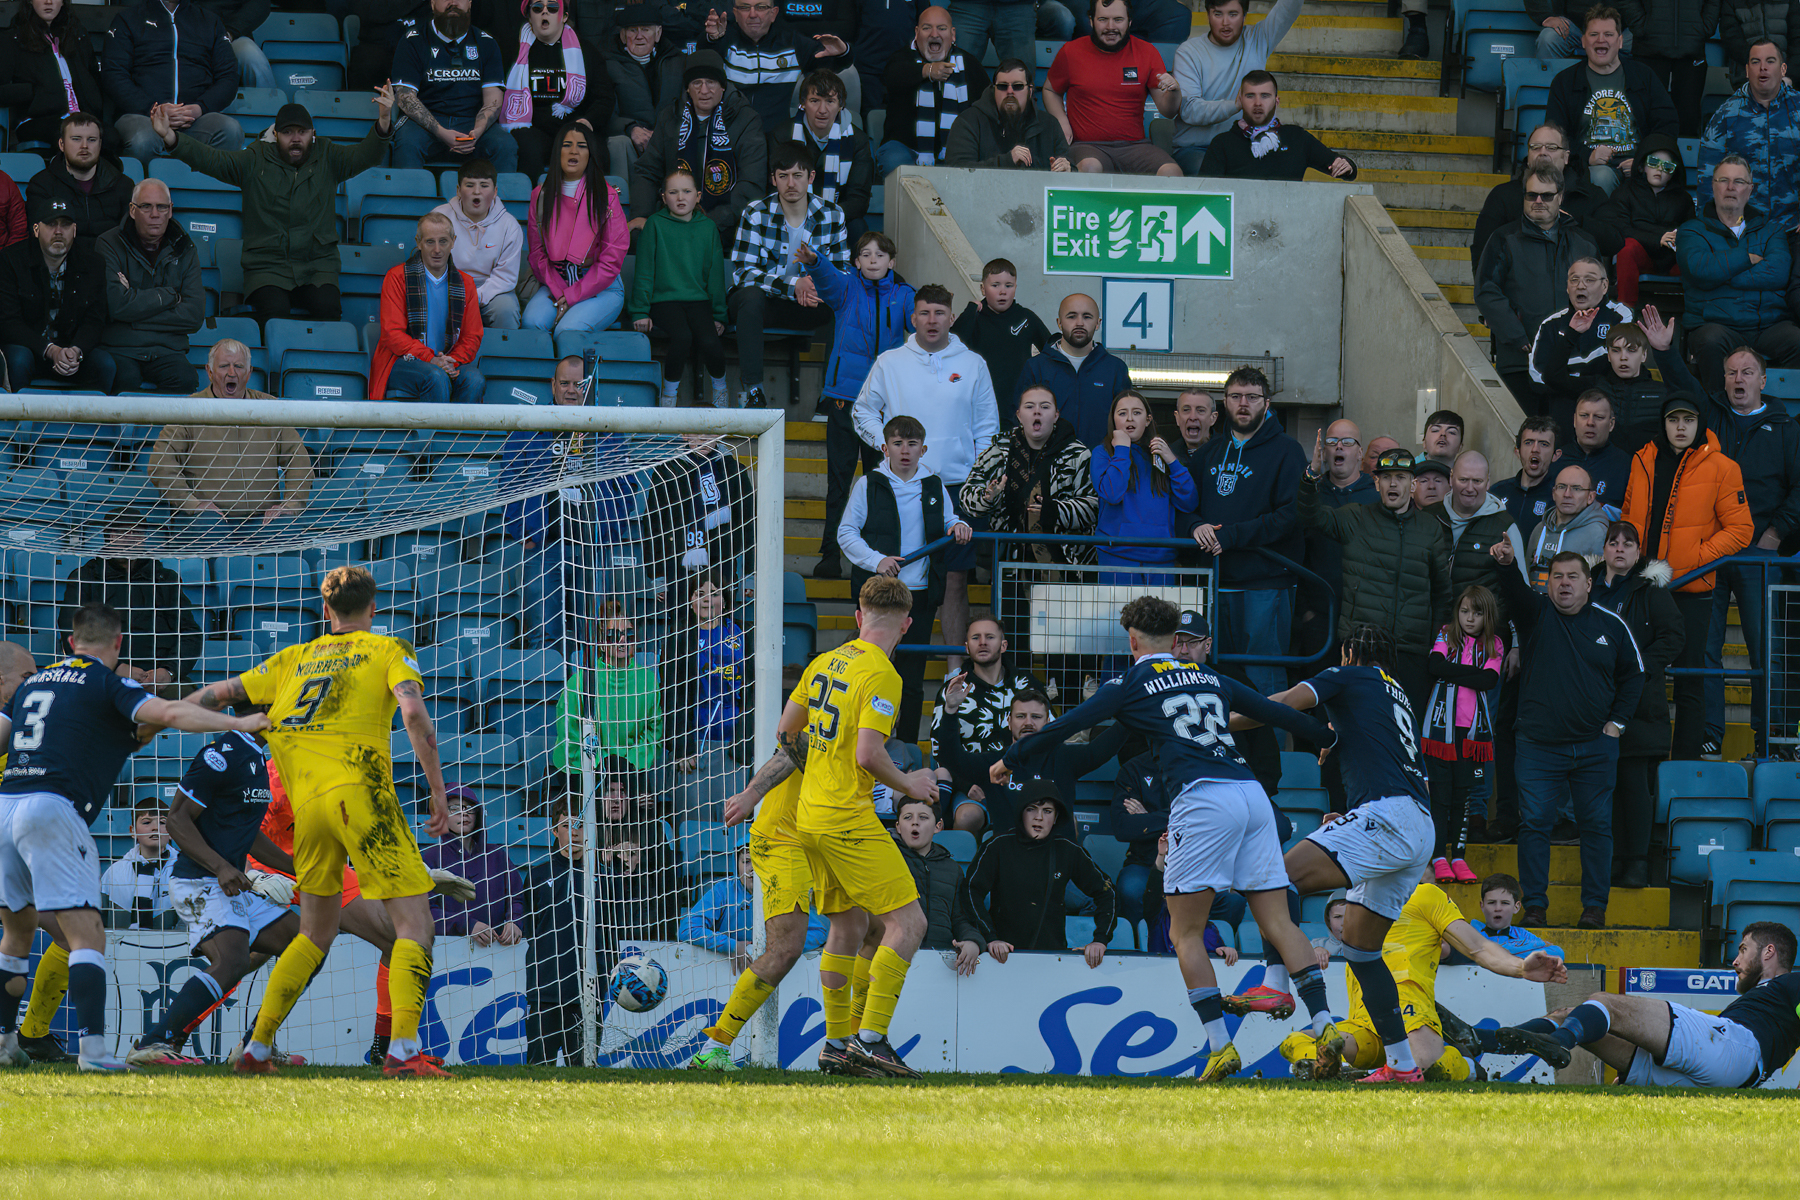 Dougie Imrie says Morton 'shot themselves in foot' against Dundee